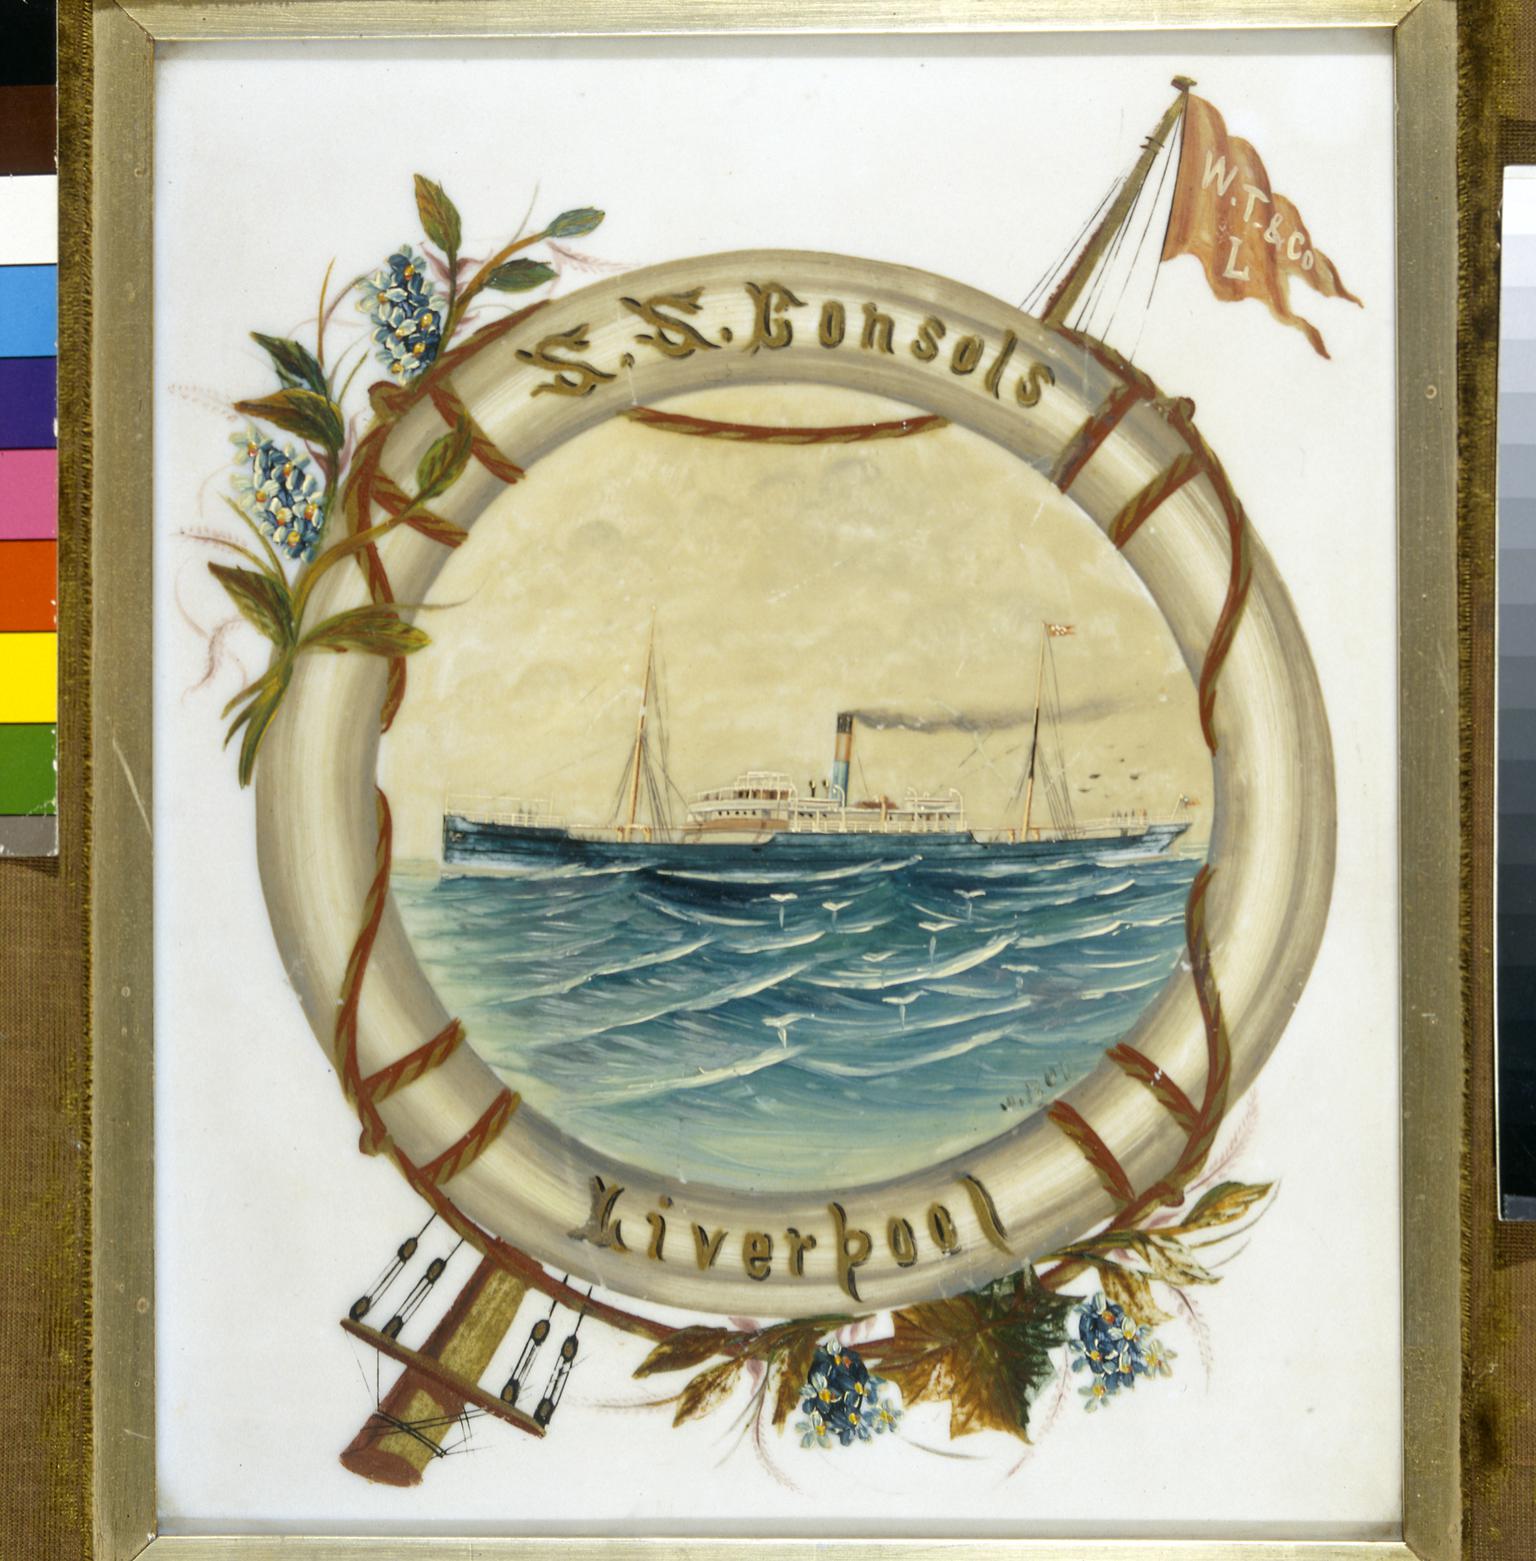 S.S. CONSOLS, Liverpool (painting)